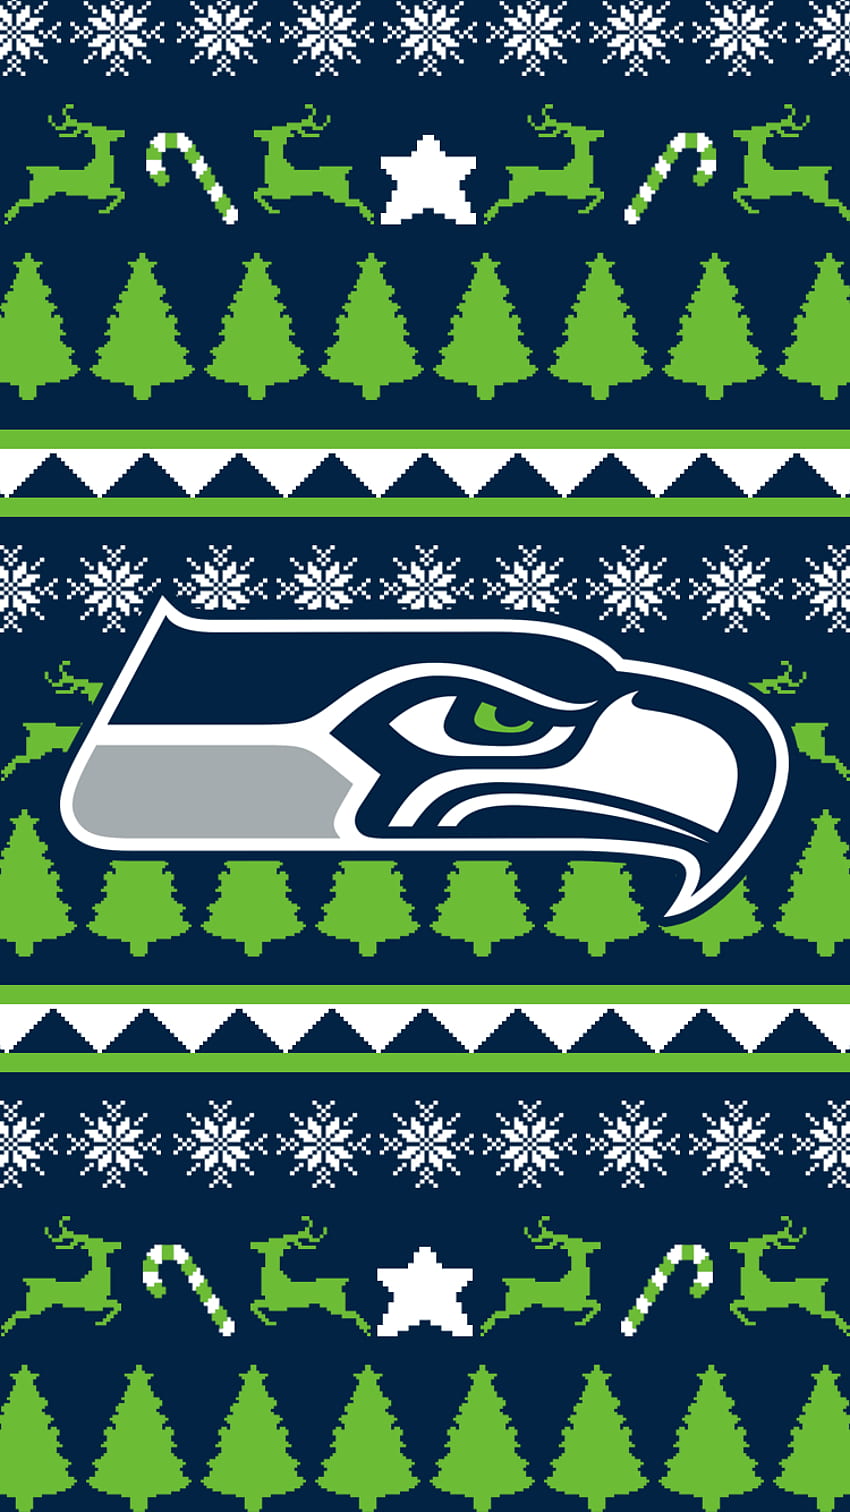 Ugly Christmas sweater inspired - Concepts - Chris Creamer's Sports Logos Community - CCSLC Forums HD phone wallpaper